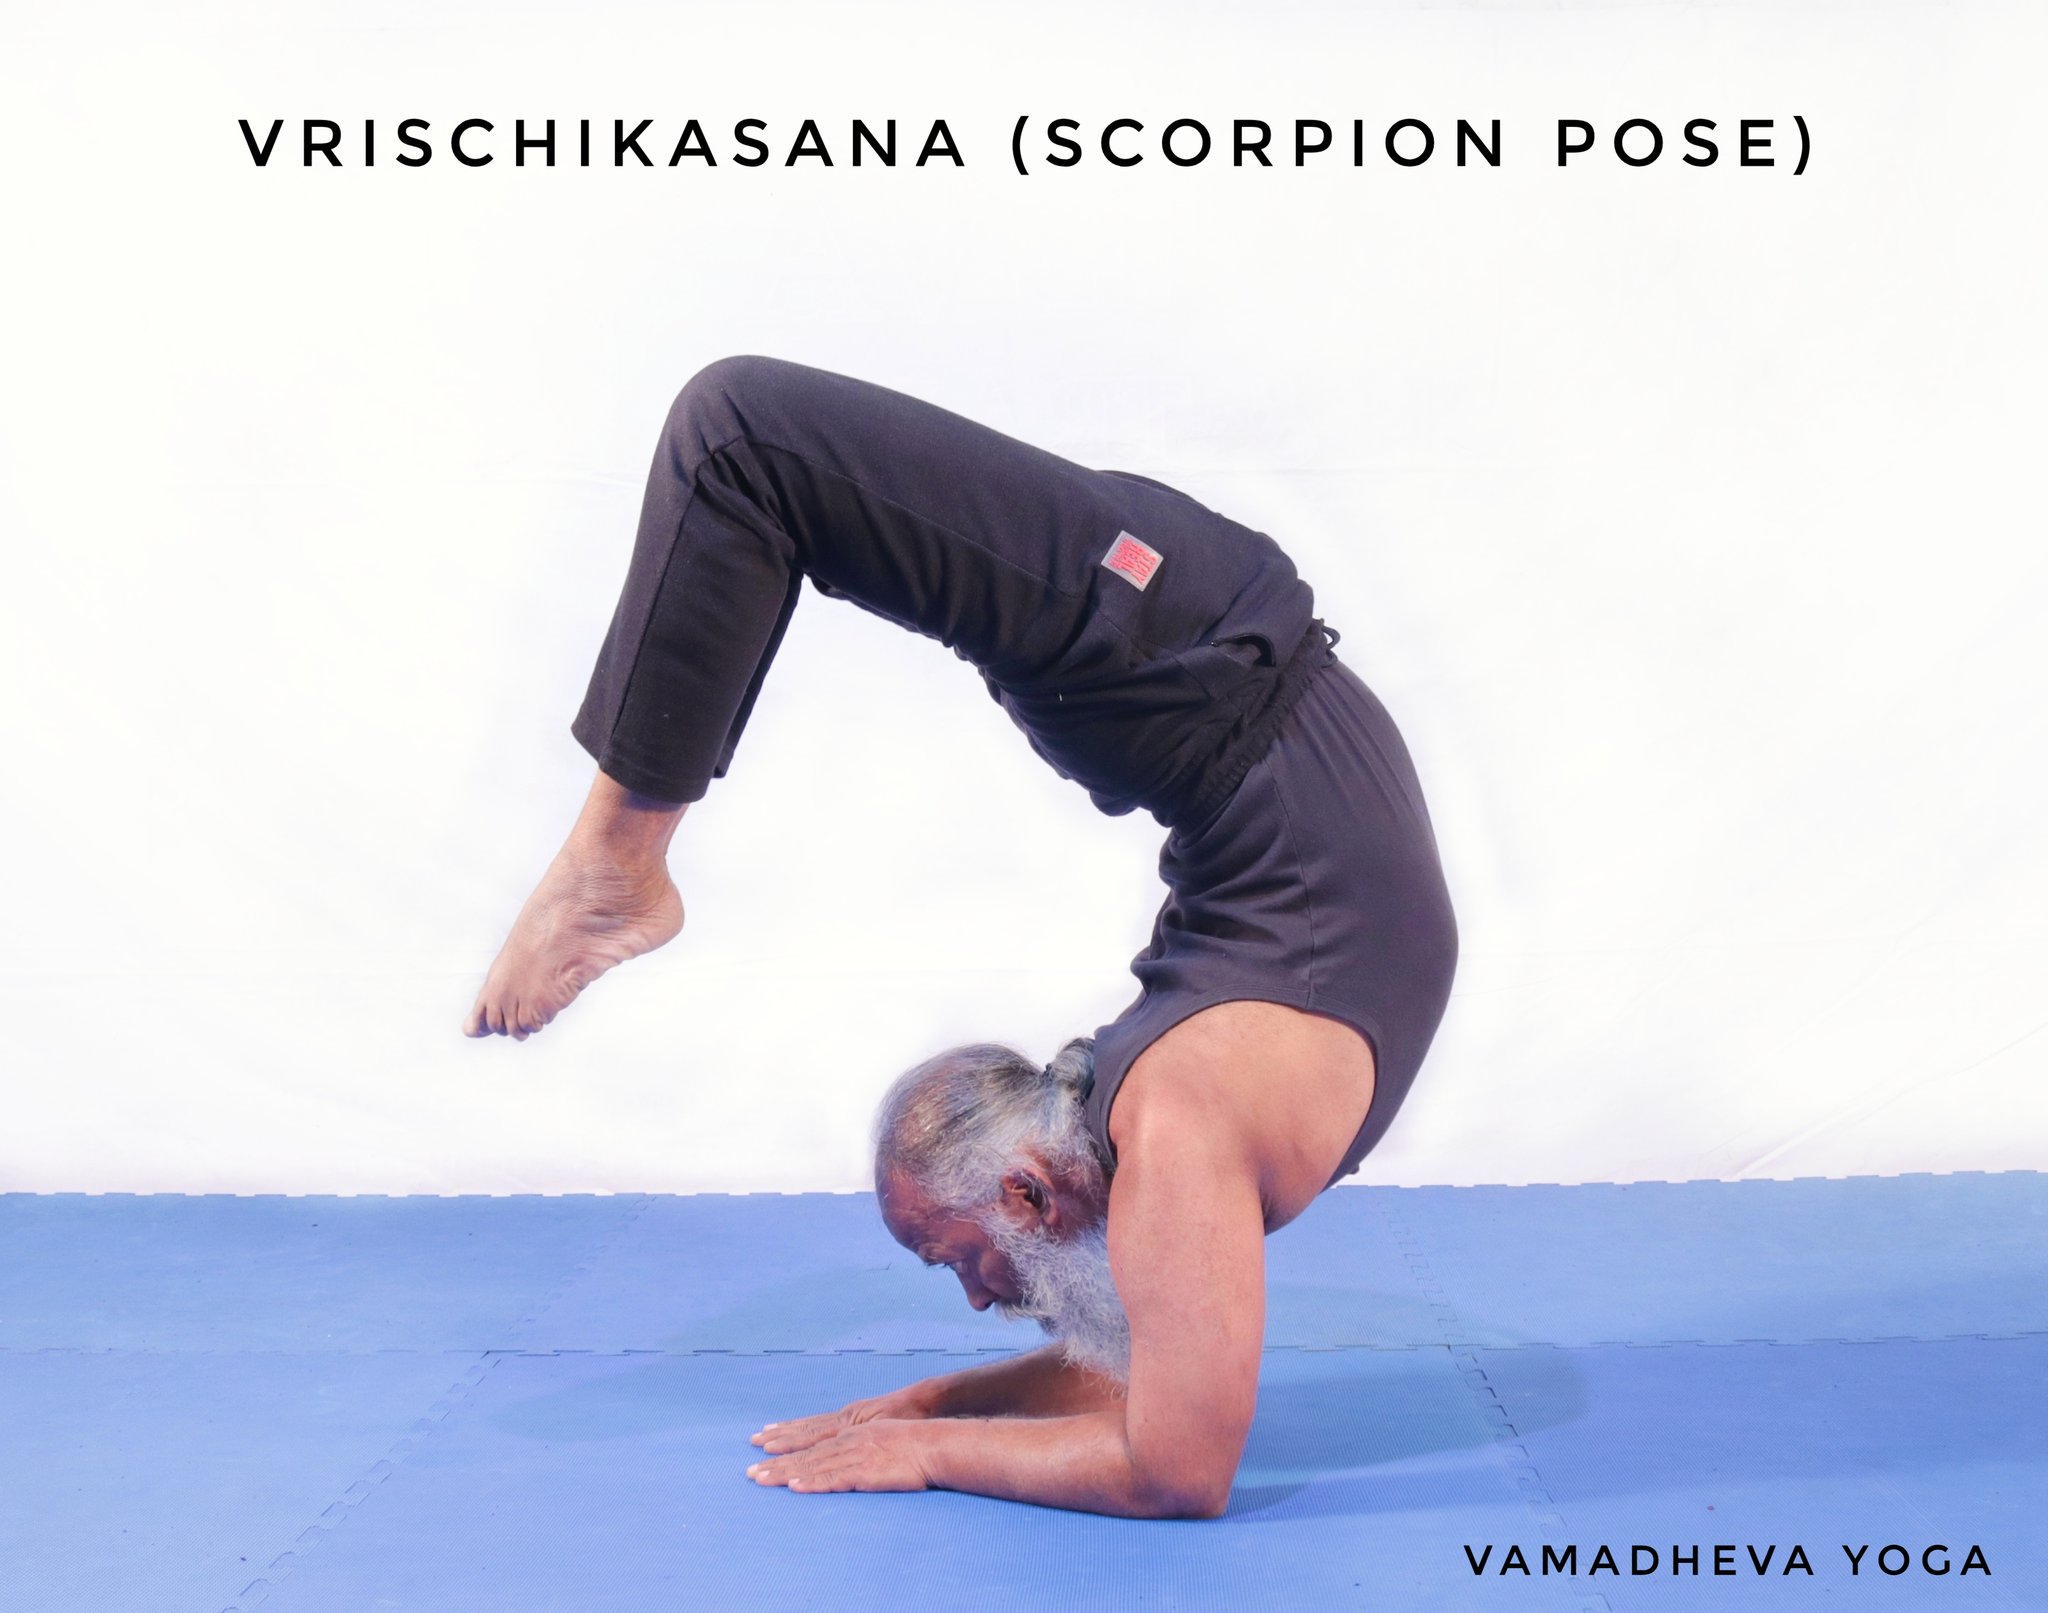 Indian Yoga Teacher Holds Scorpion Pose For 29 Minutes, Creates World Record